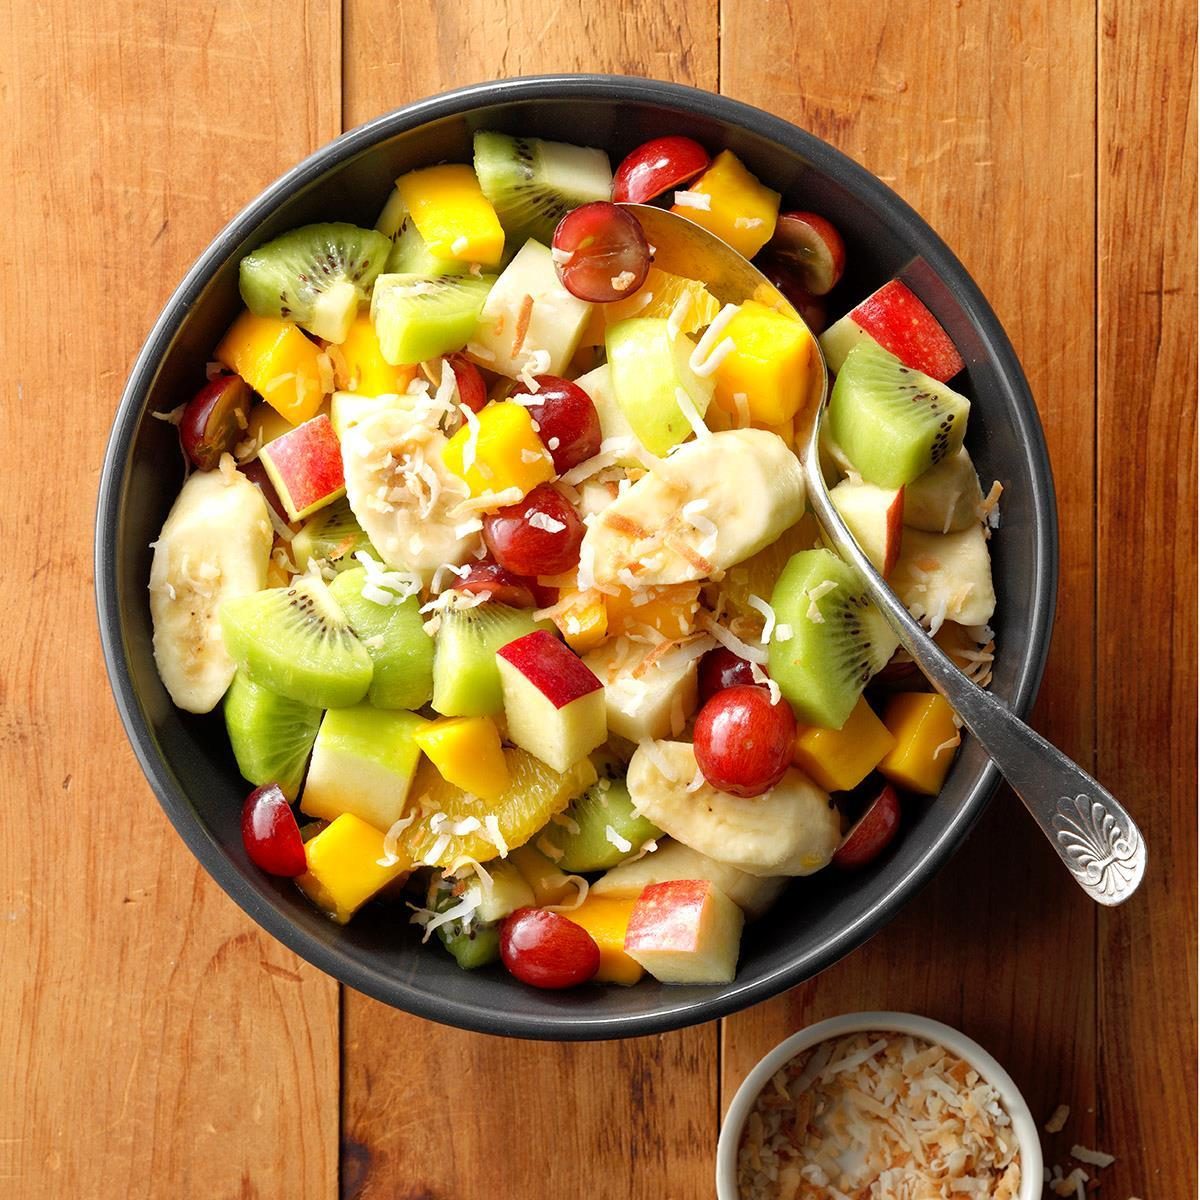 Coconut Tropical Fruit Salad Recipe: How to Make It